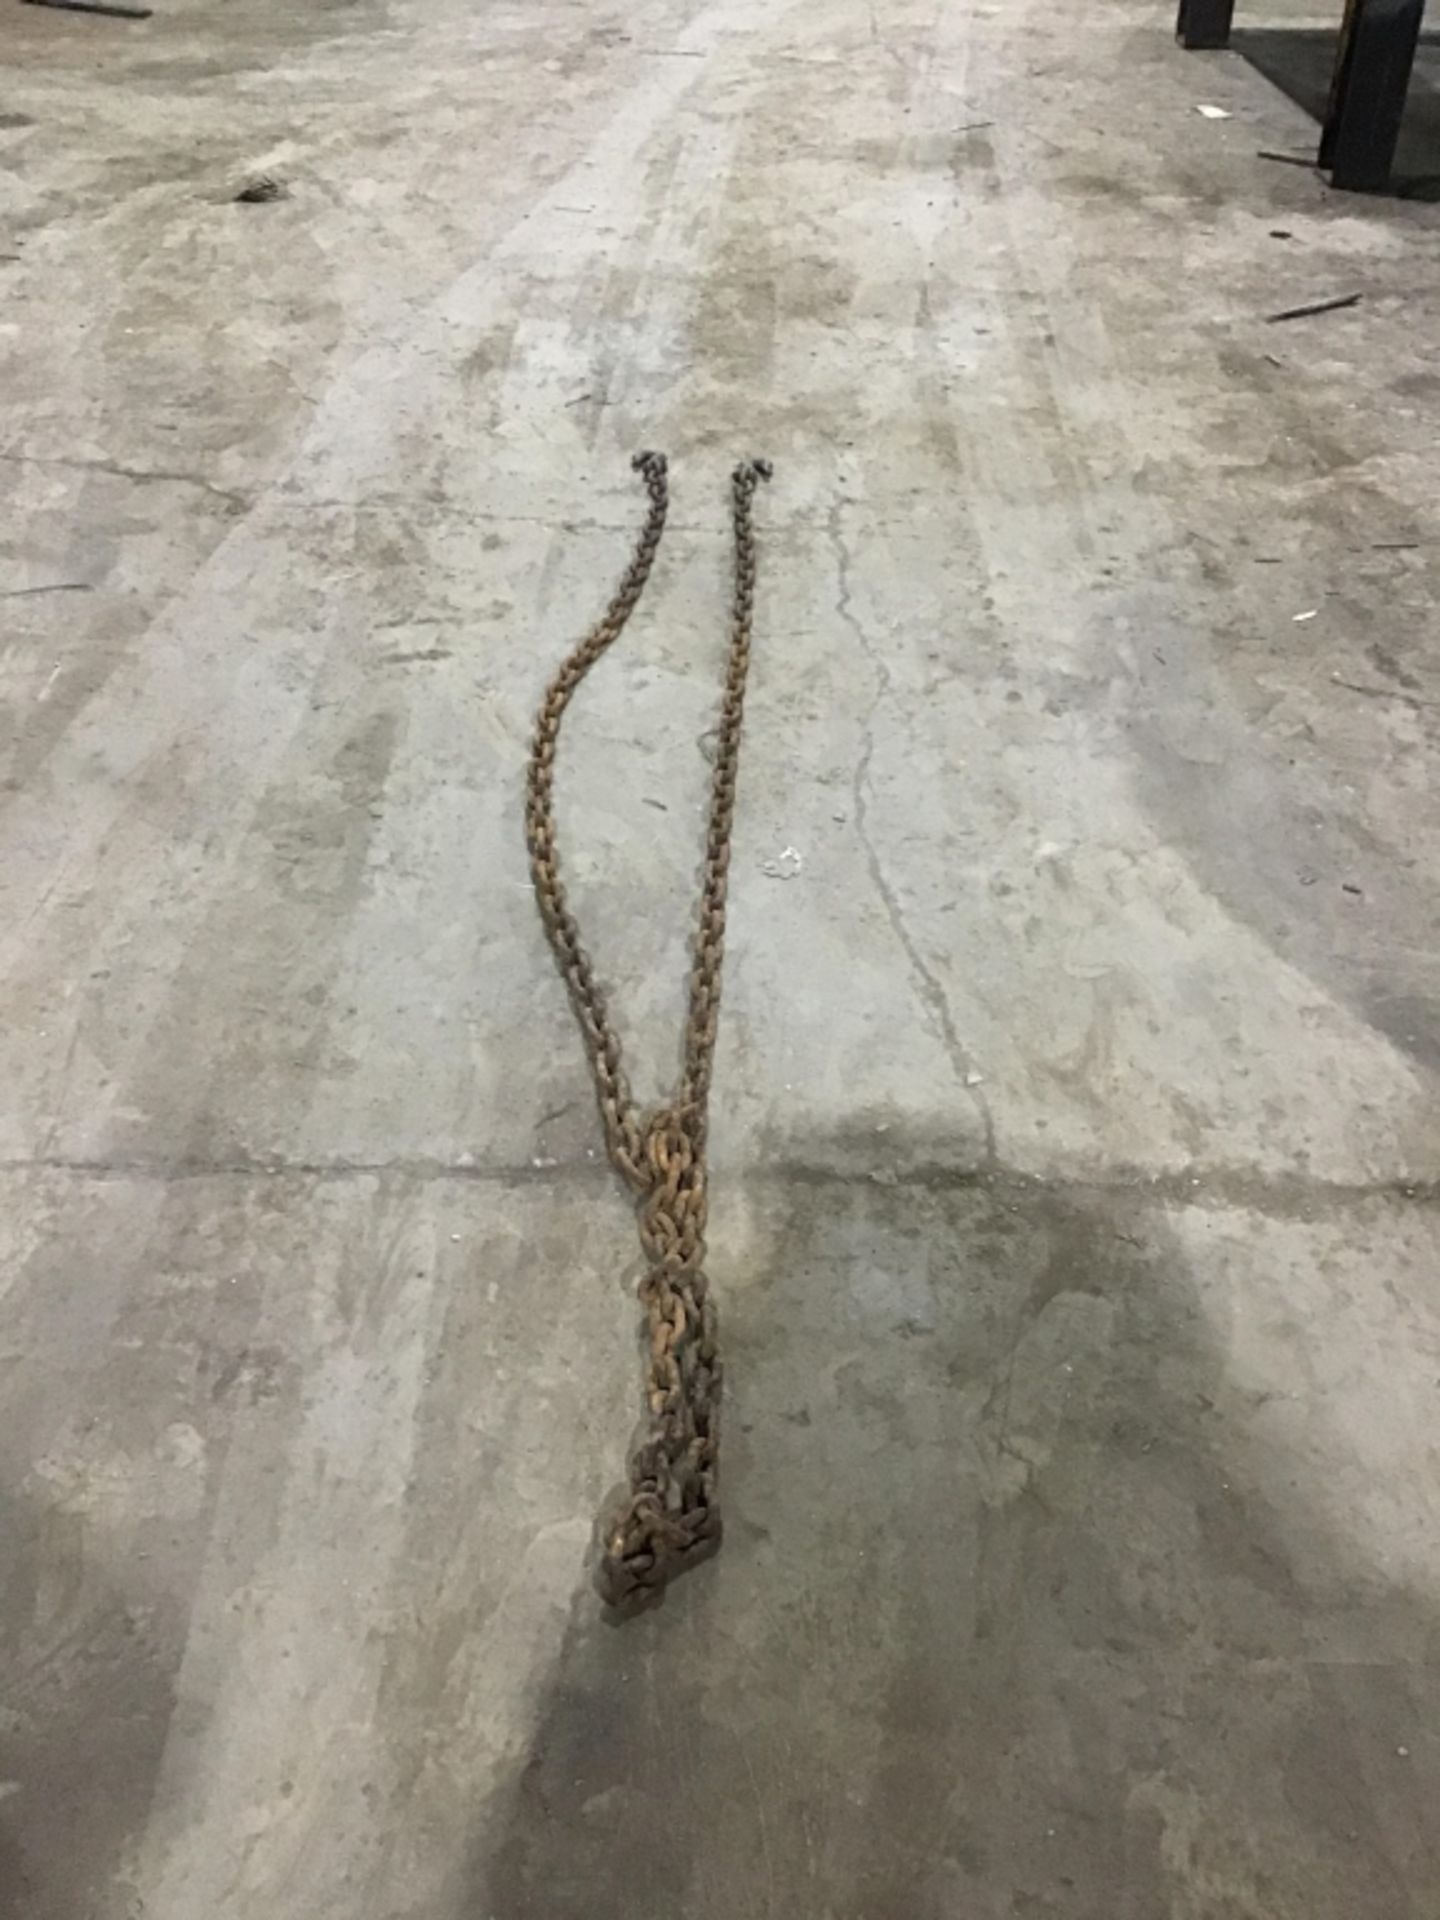 7/16, log chain, 12 foot - Image 2 of 2